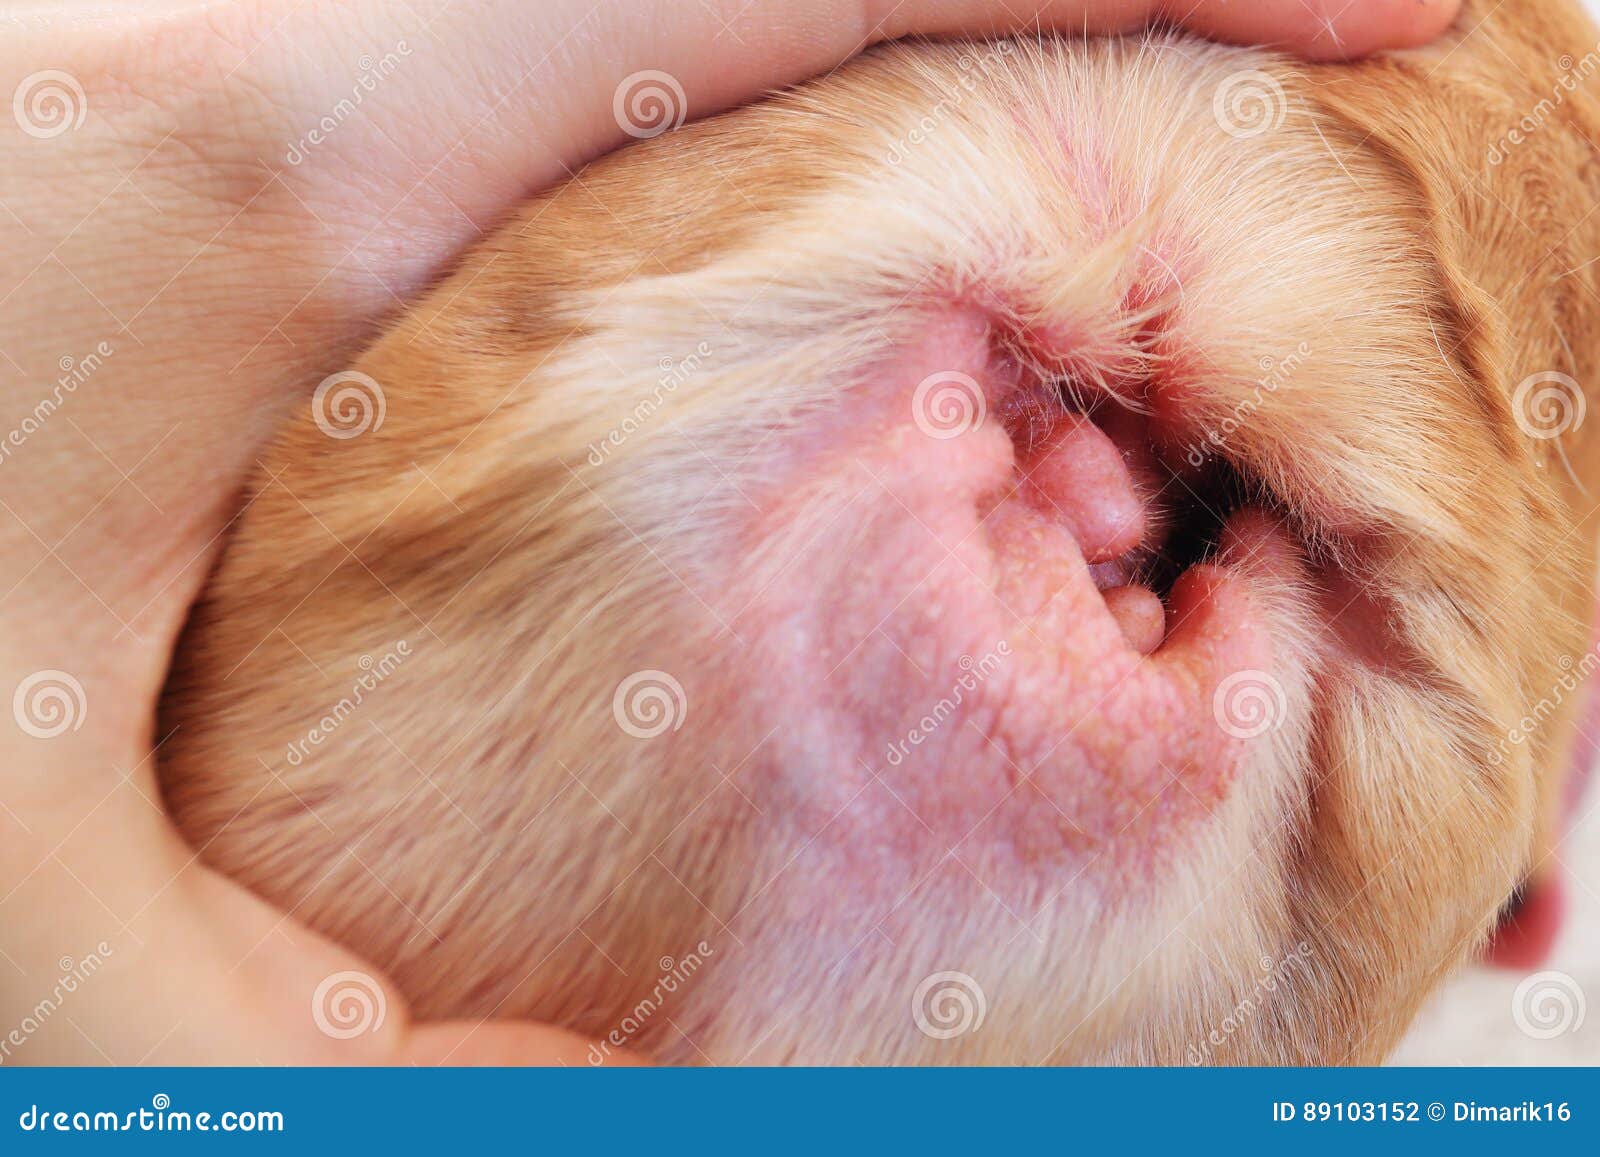 213 Dog Ear Inside Stock Photos - & Royalty-Free Stock Photos from Dreamstime